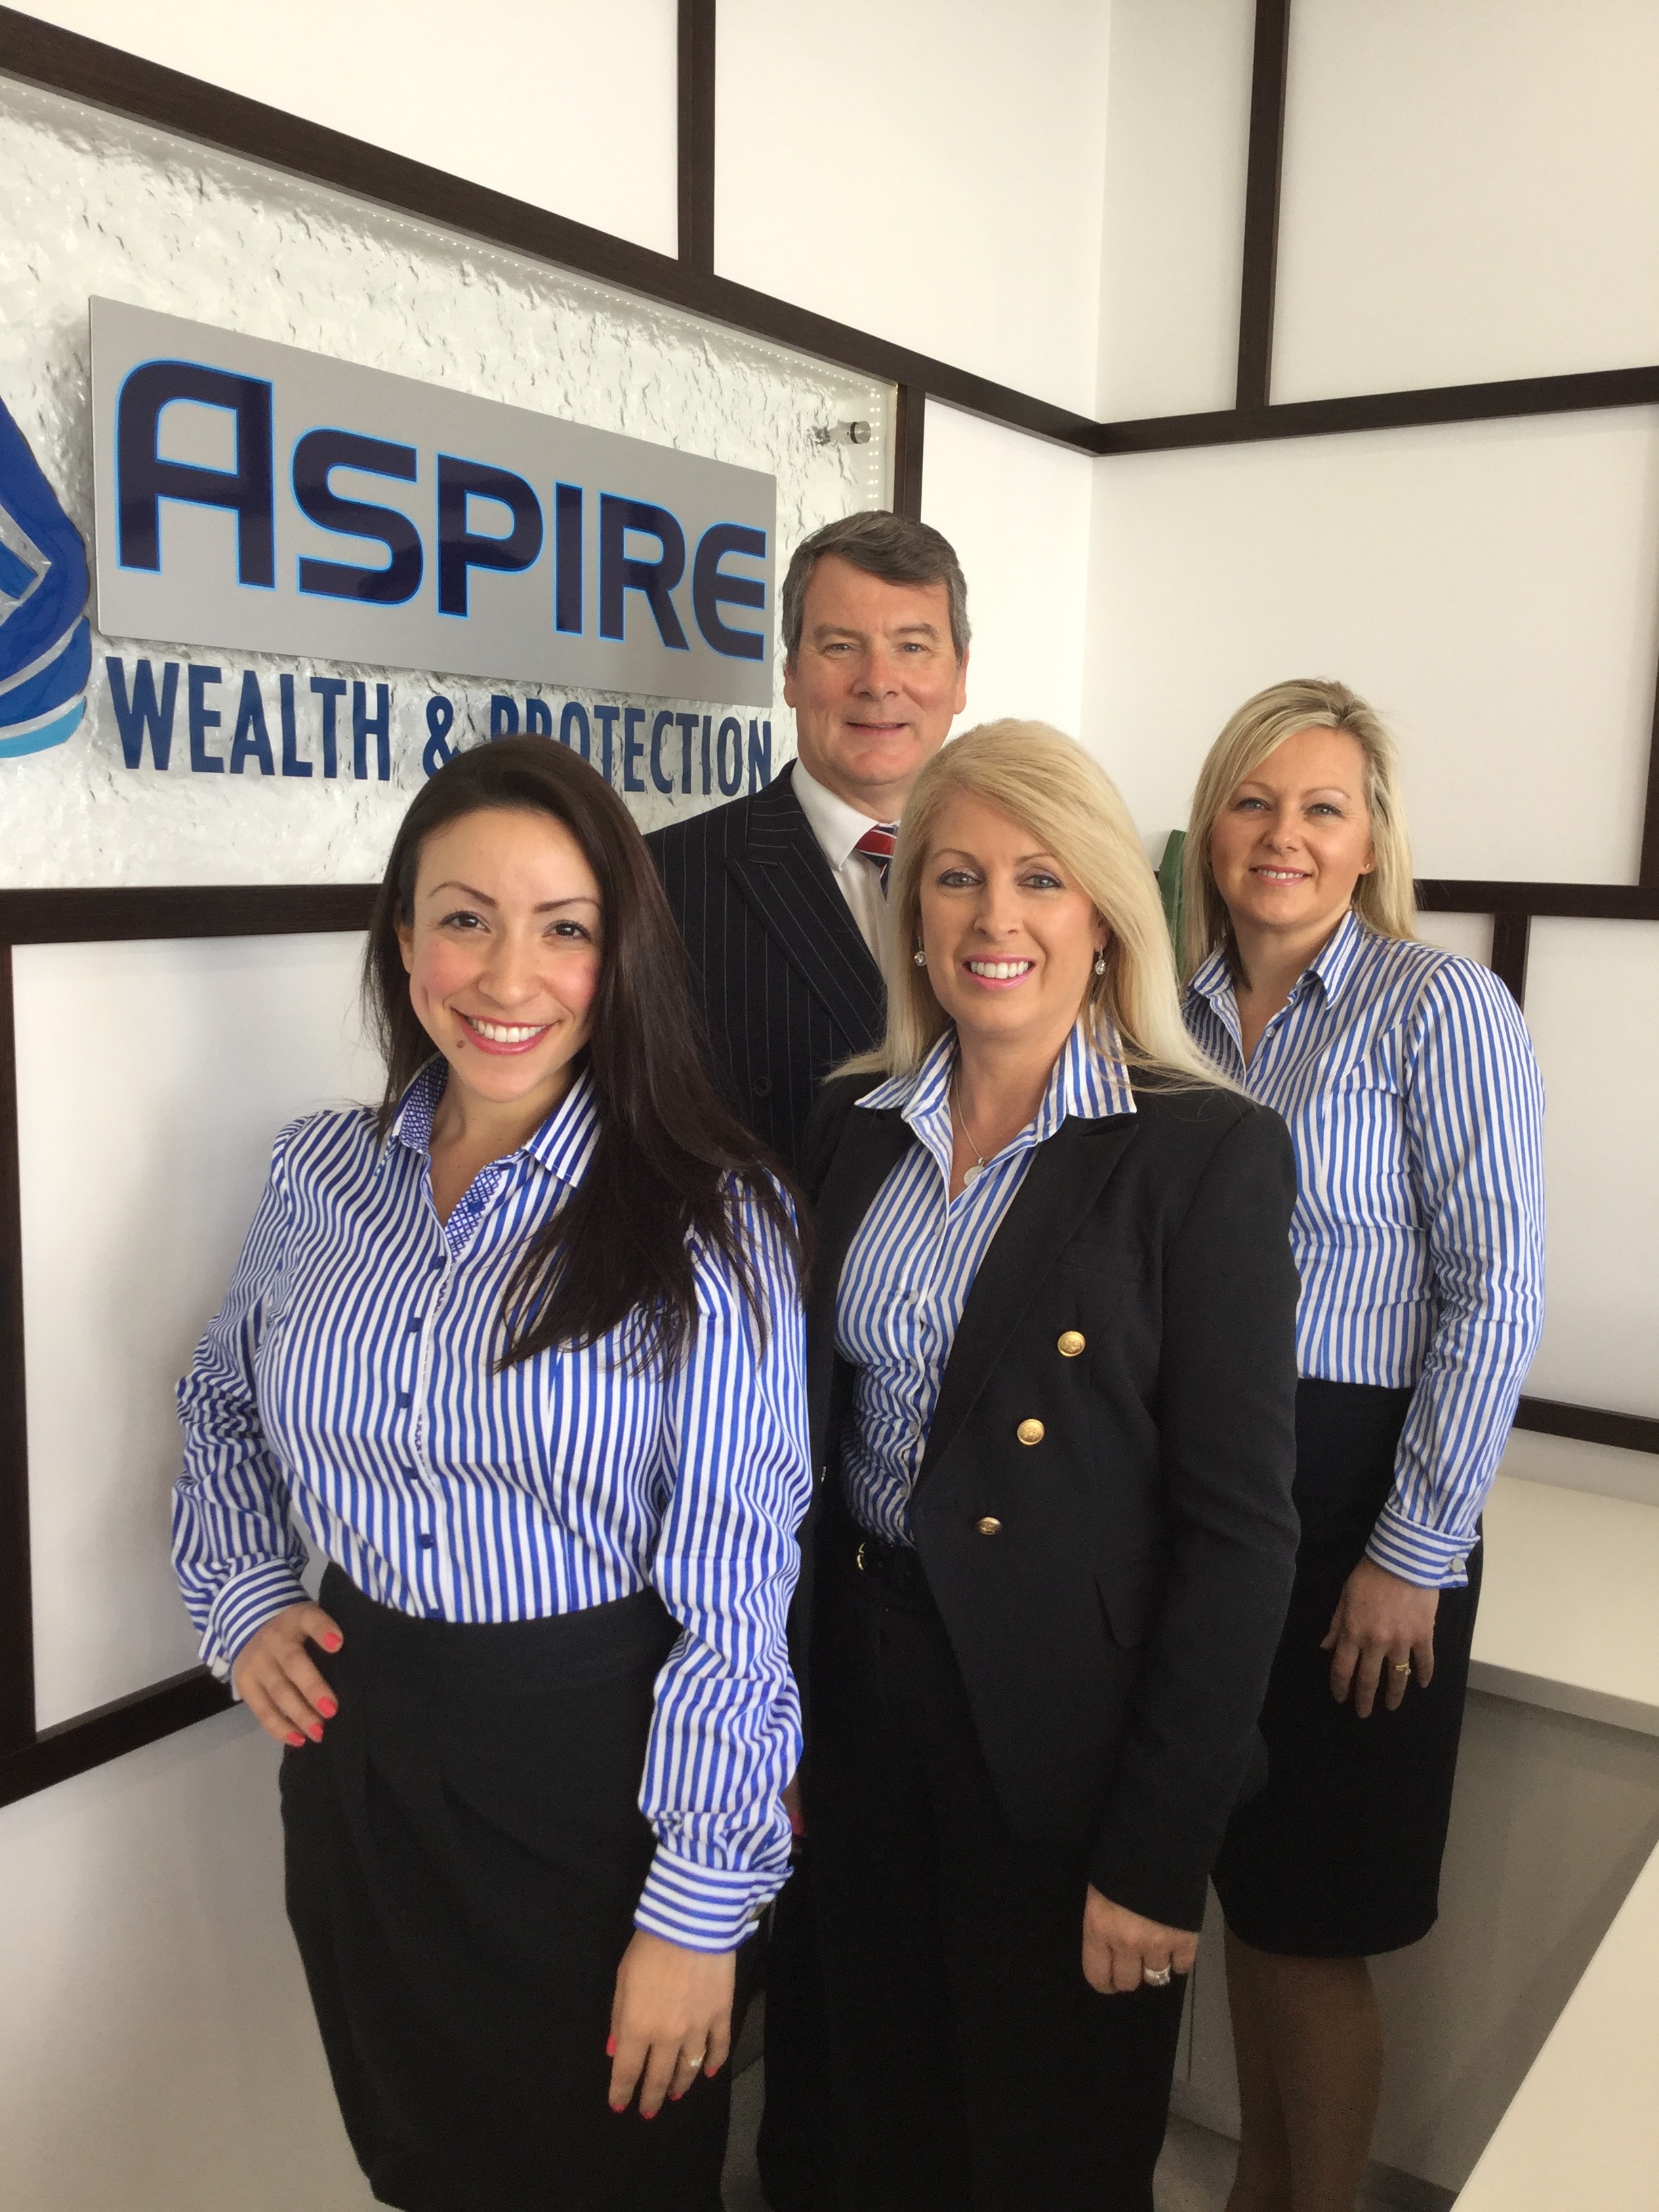 The team at Aspire Wealth and Protection Nelson Bay - Estelle Lopez, Chris Hale, Sue Hale and Michelle Glew.